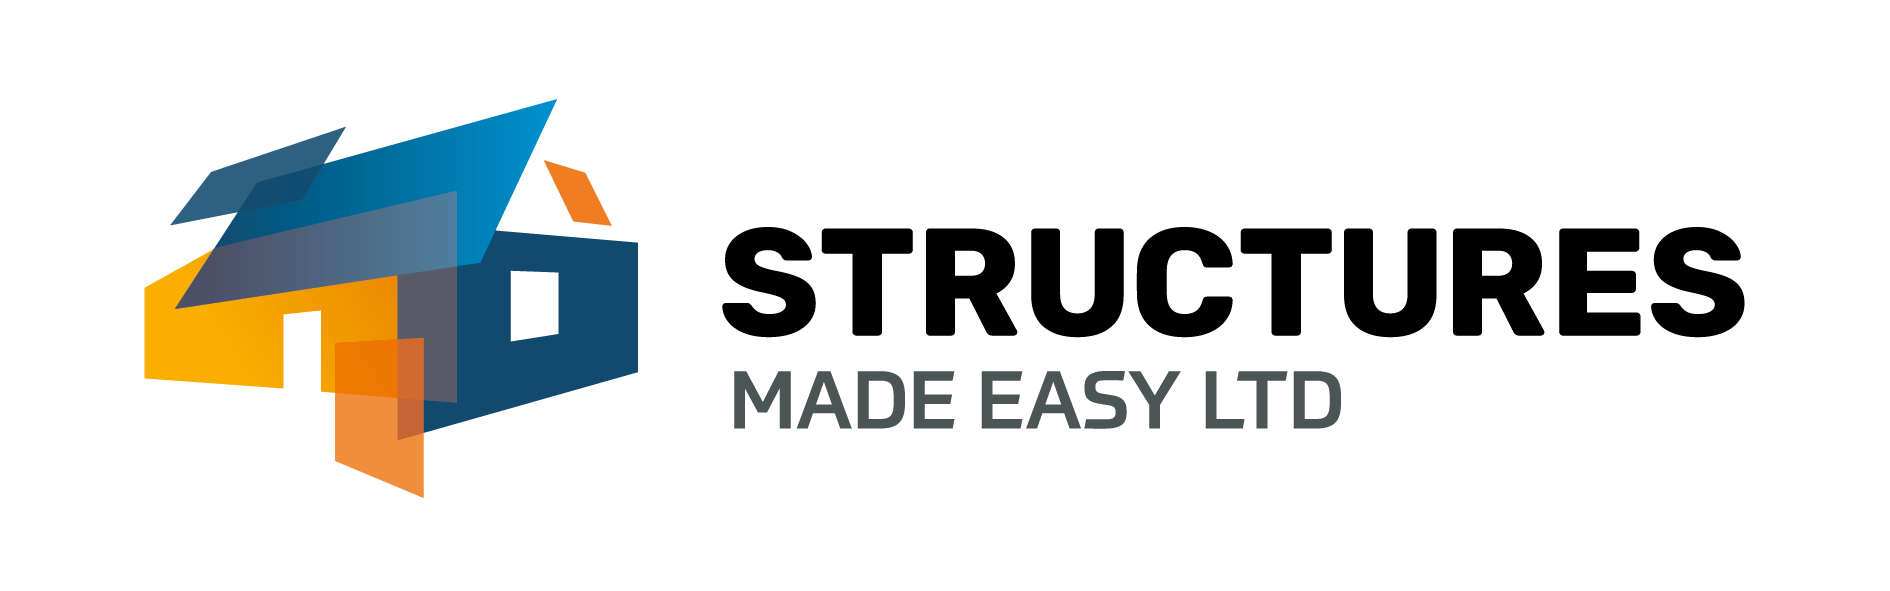 Structures Made Easy Ltd